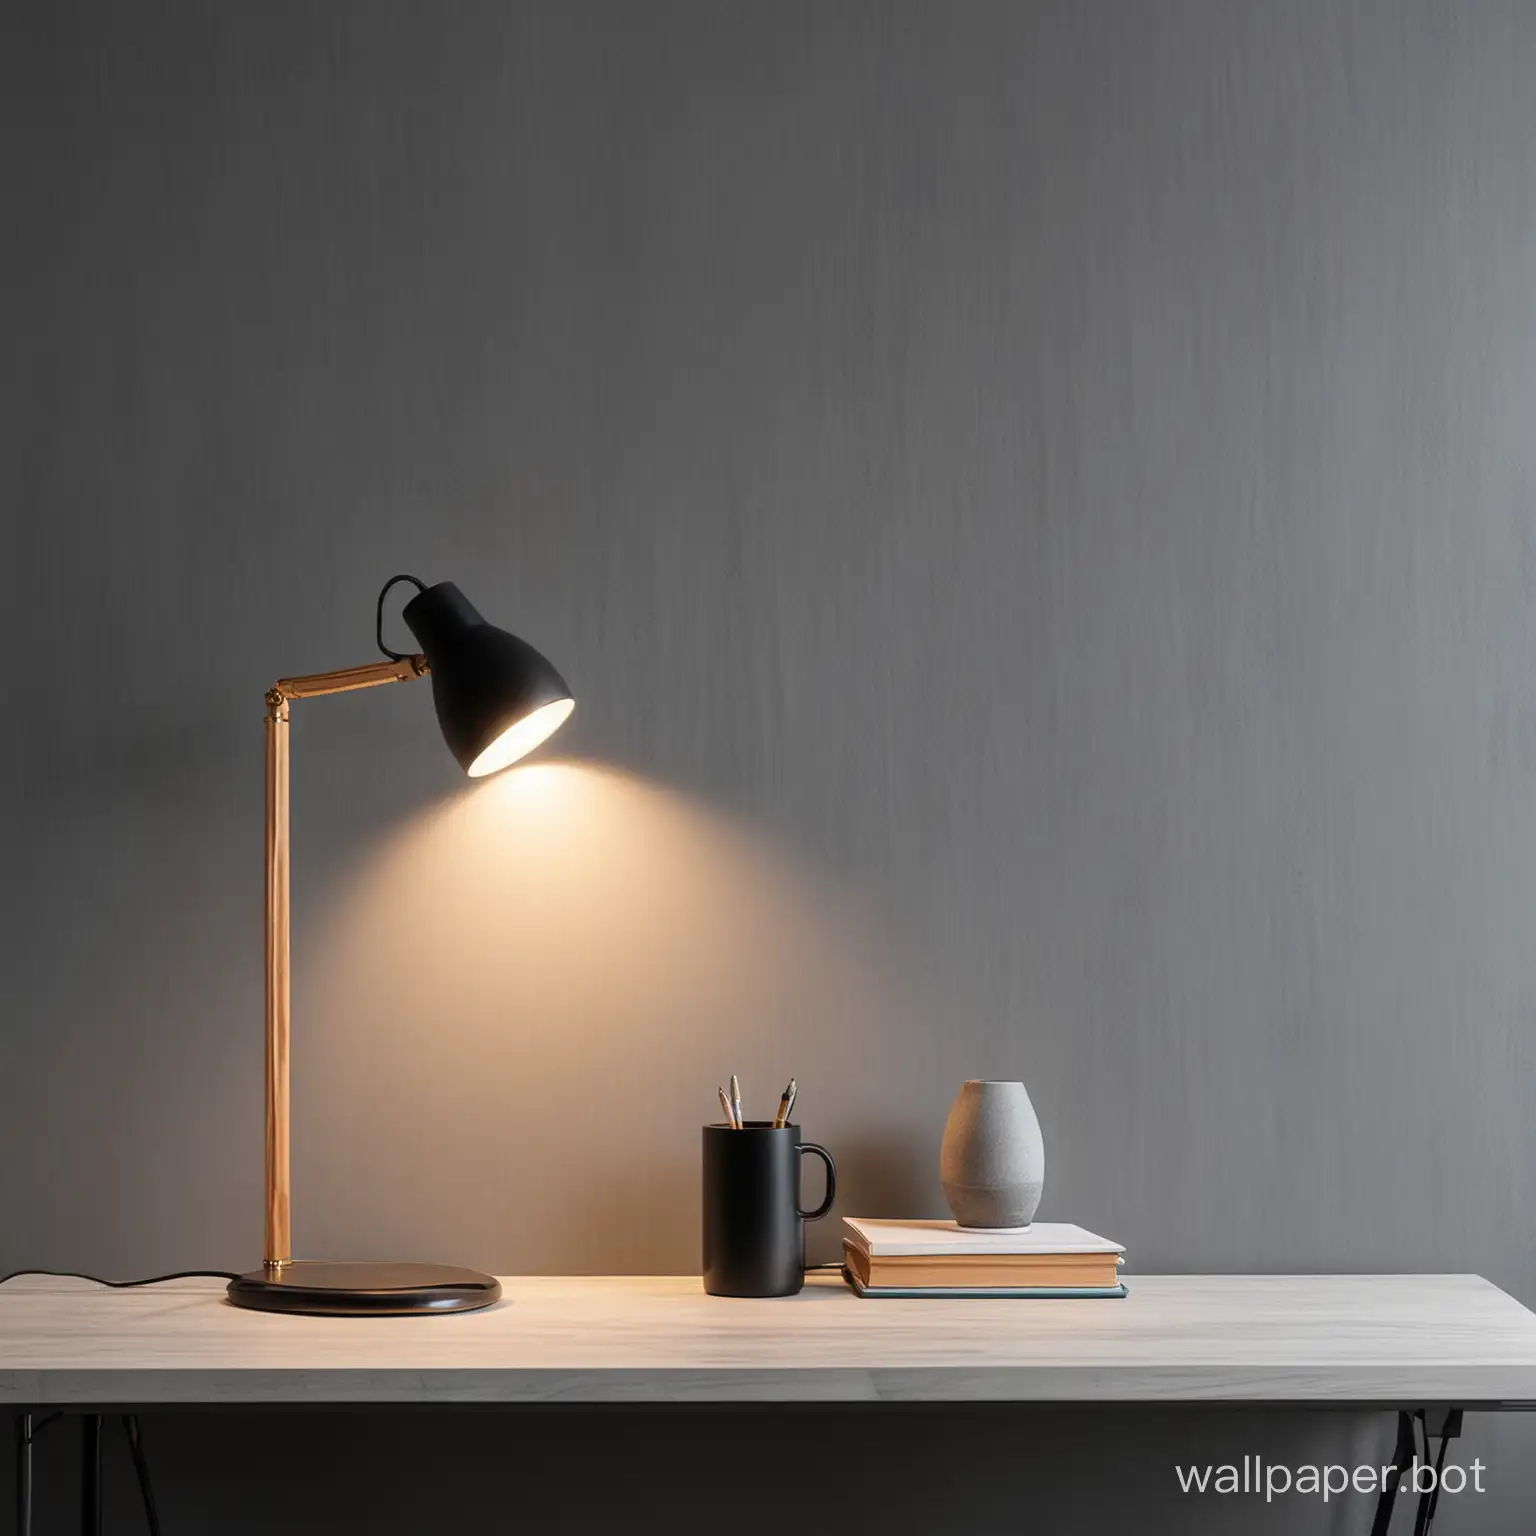 Minimalist-Gray-Office-Wallpaper-with-Lamp-and-Contrasting-Wood-and-Black-Accents